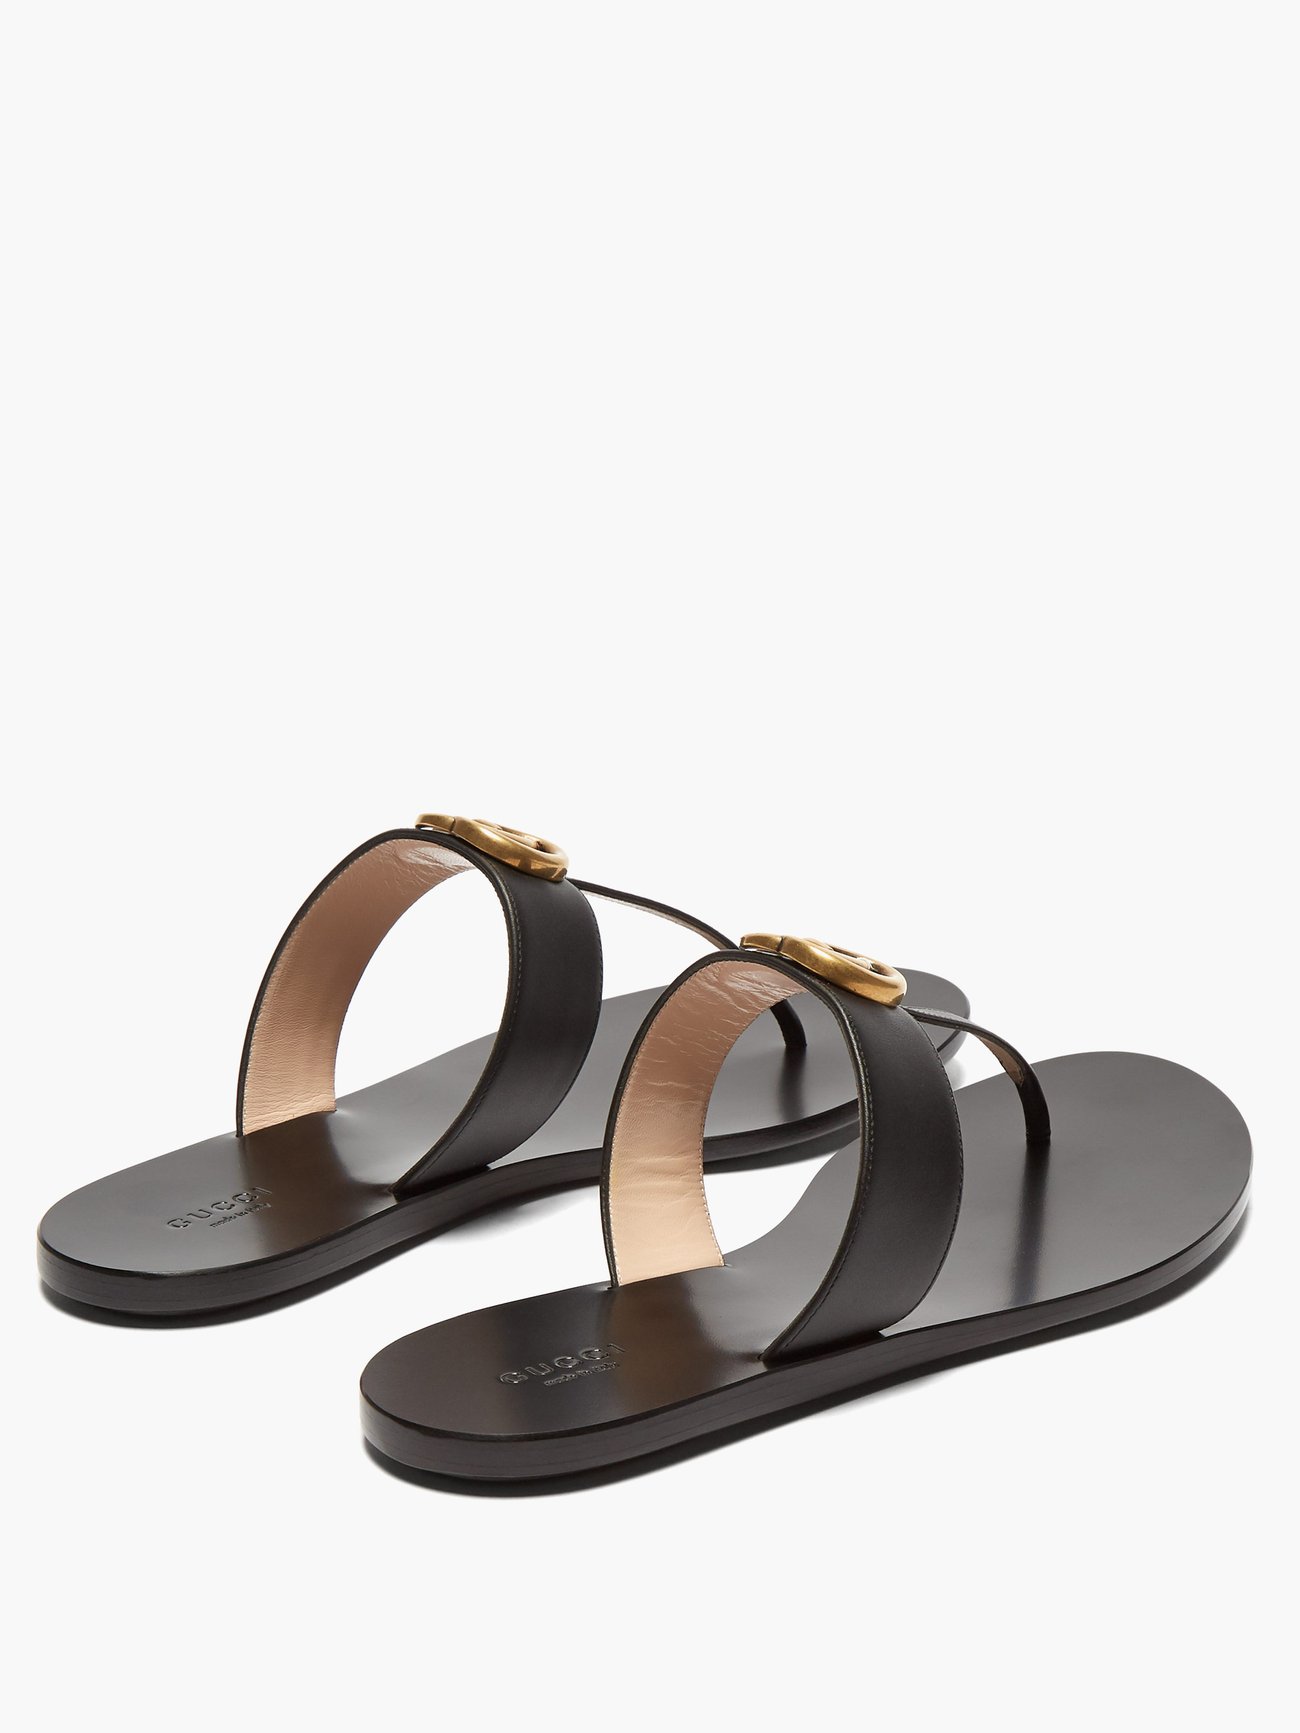 Gucci Marmont Leather Sandals - Black - Slippers